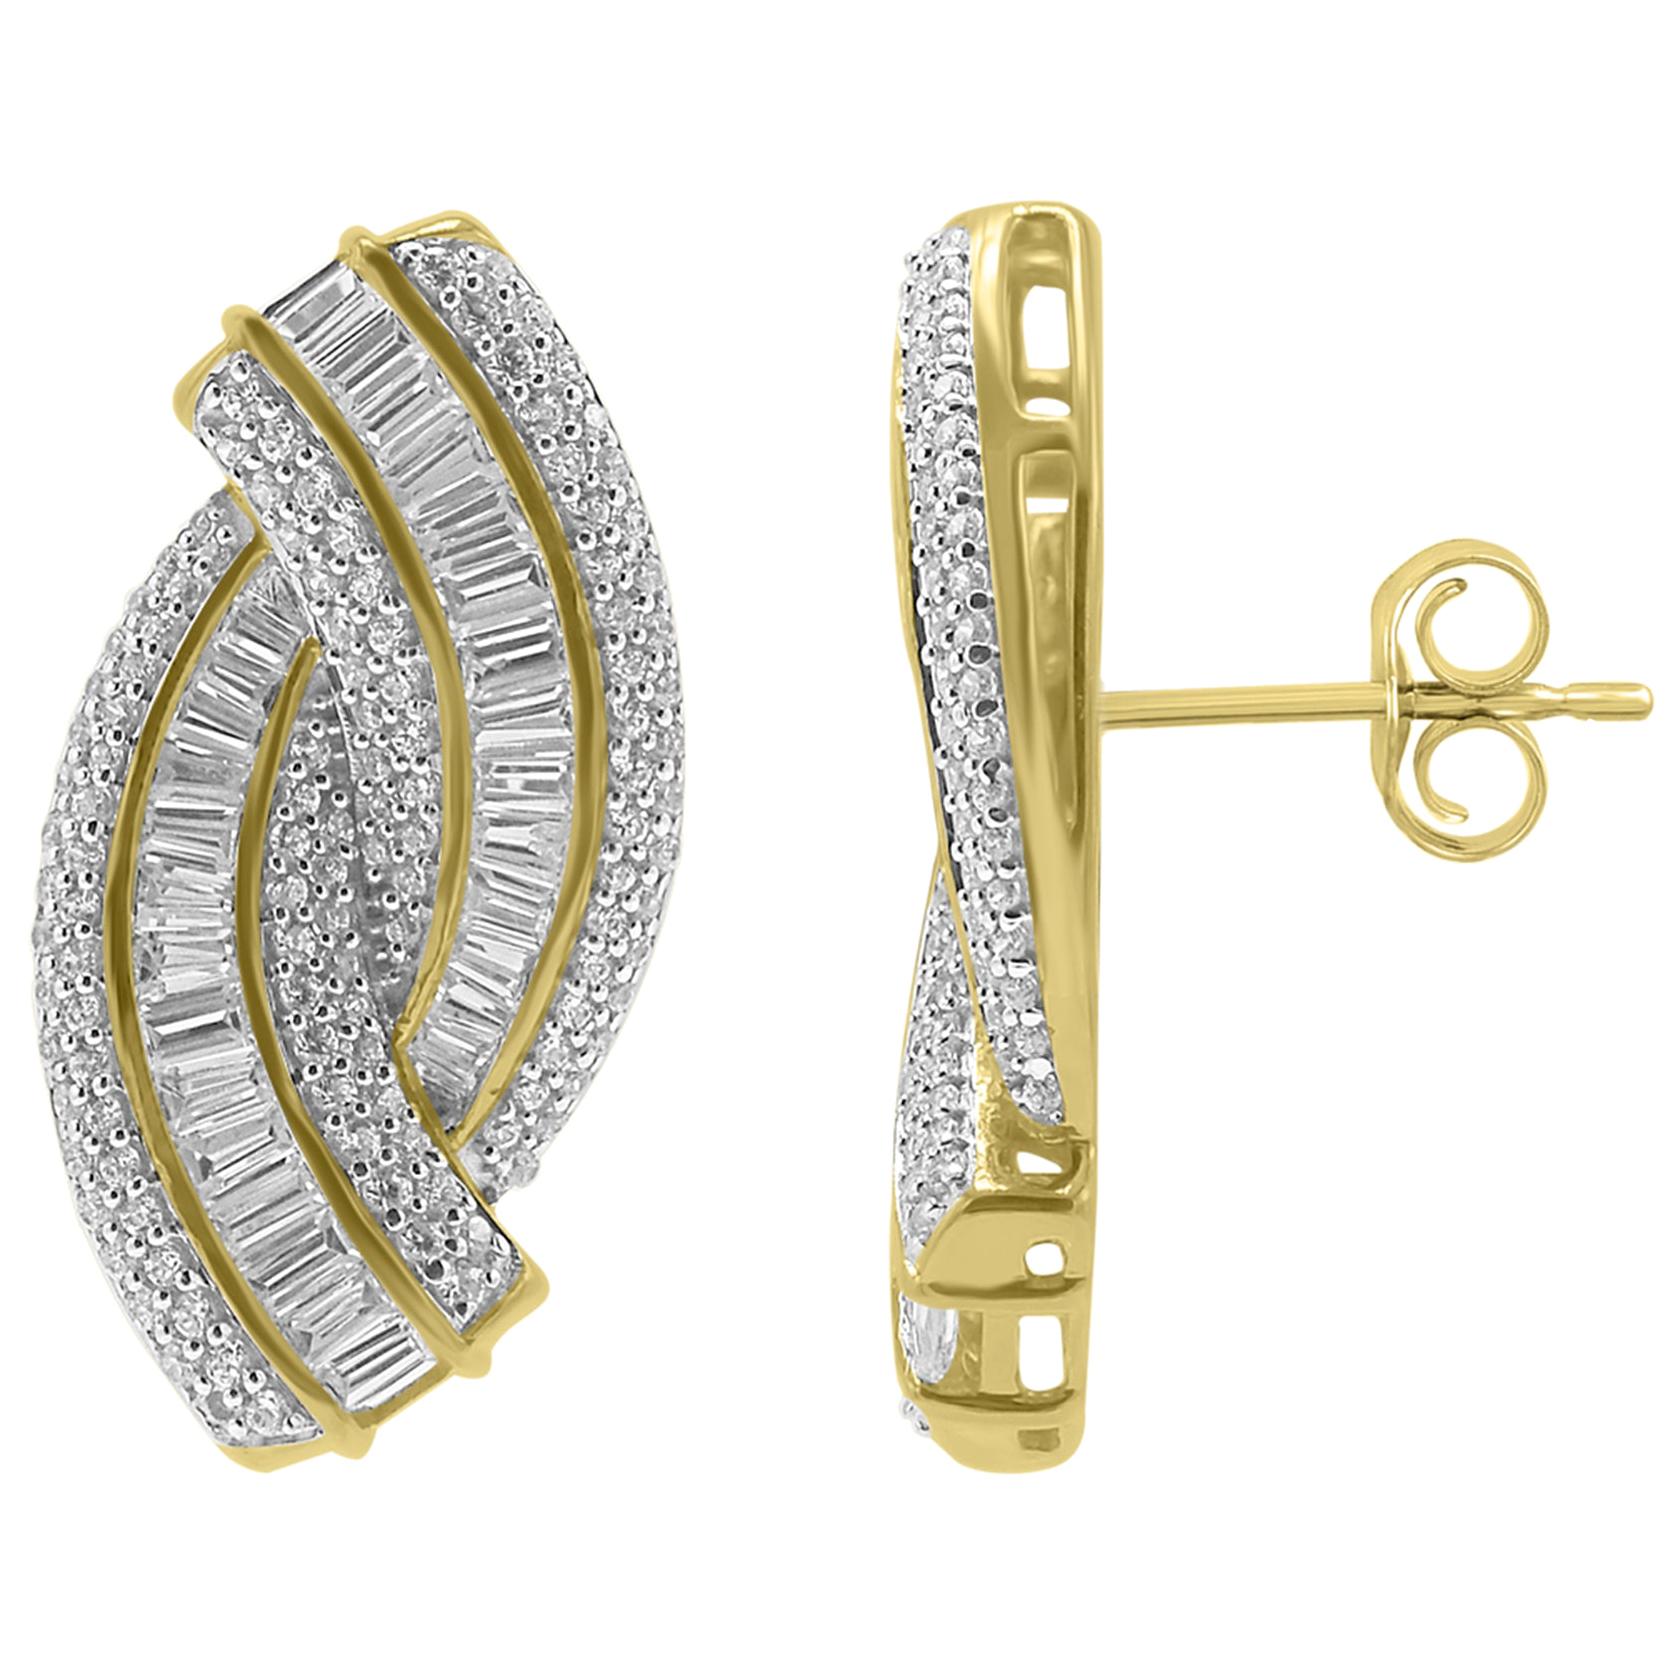 TJD 2 Carat Round and Baguette diamond 14Karat Yellow Gold Twist Curved Earrings